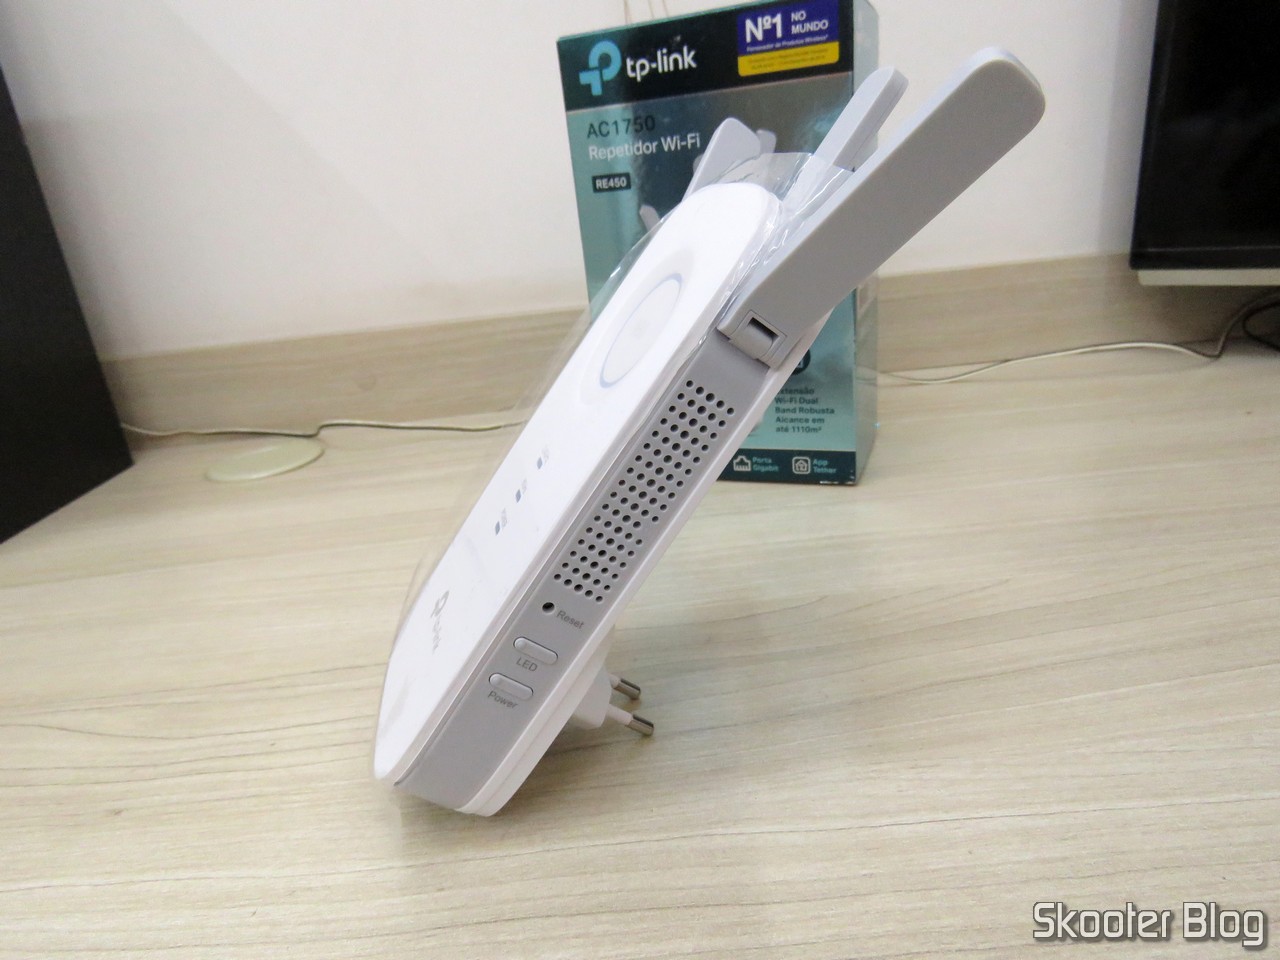 Review] Repetidor Wi-Fi TP-Link AC1750 RE450 - Skooter Blog